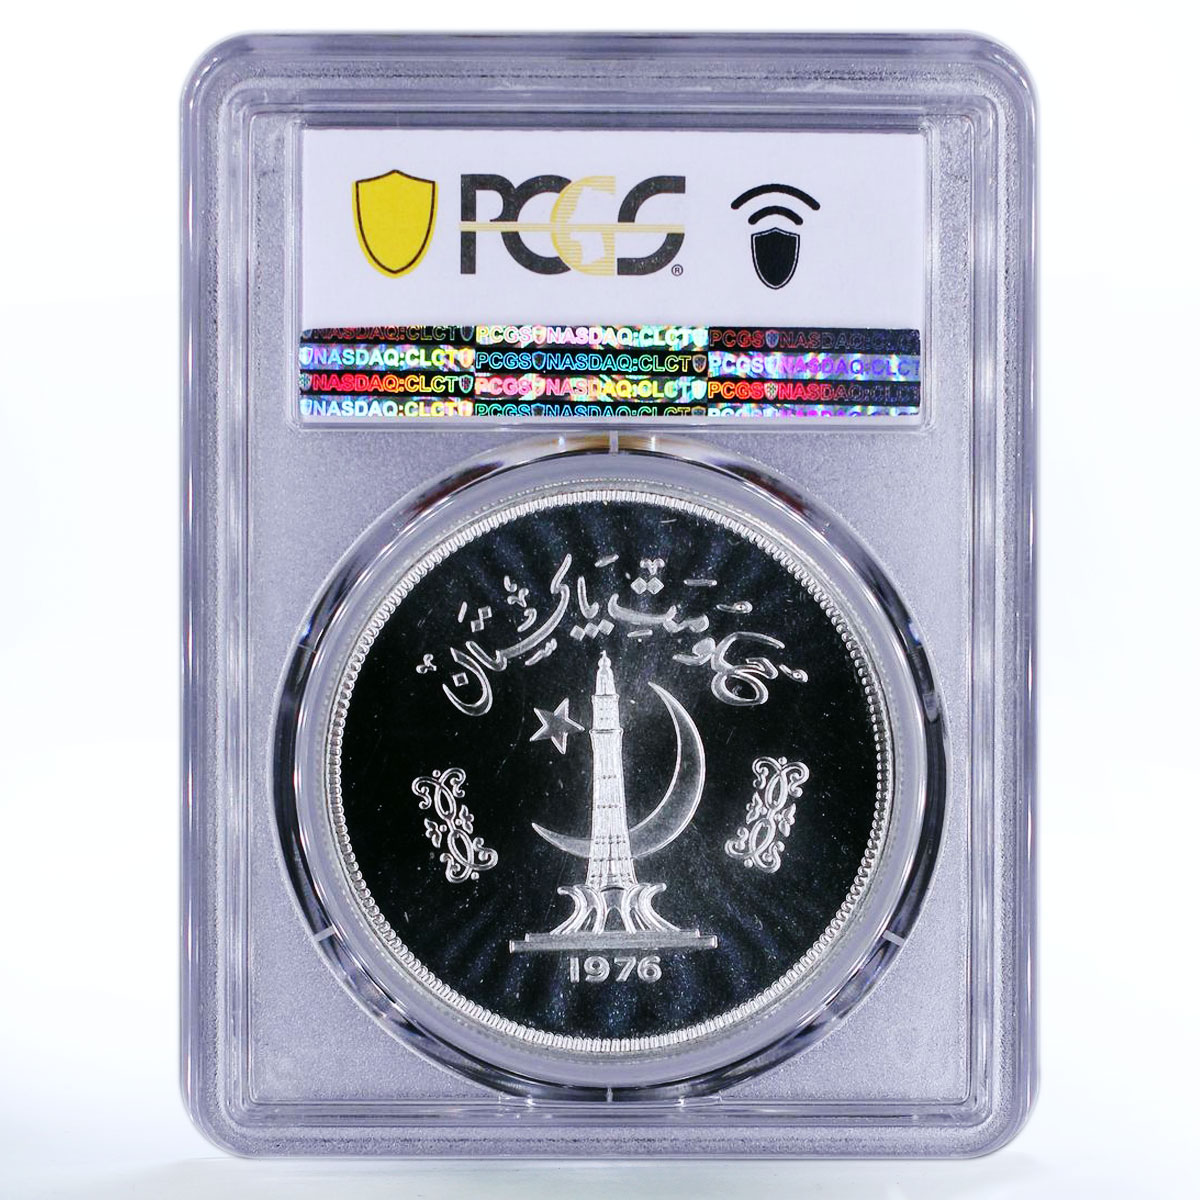 Pakistan 150 rupees WWF series Gavial Crocodile MS68 PCGS proof silver coin 1976